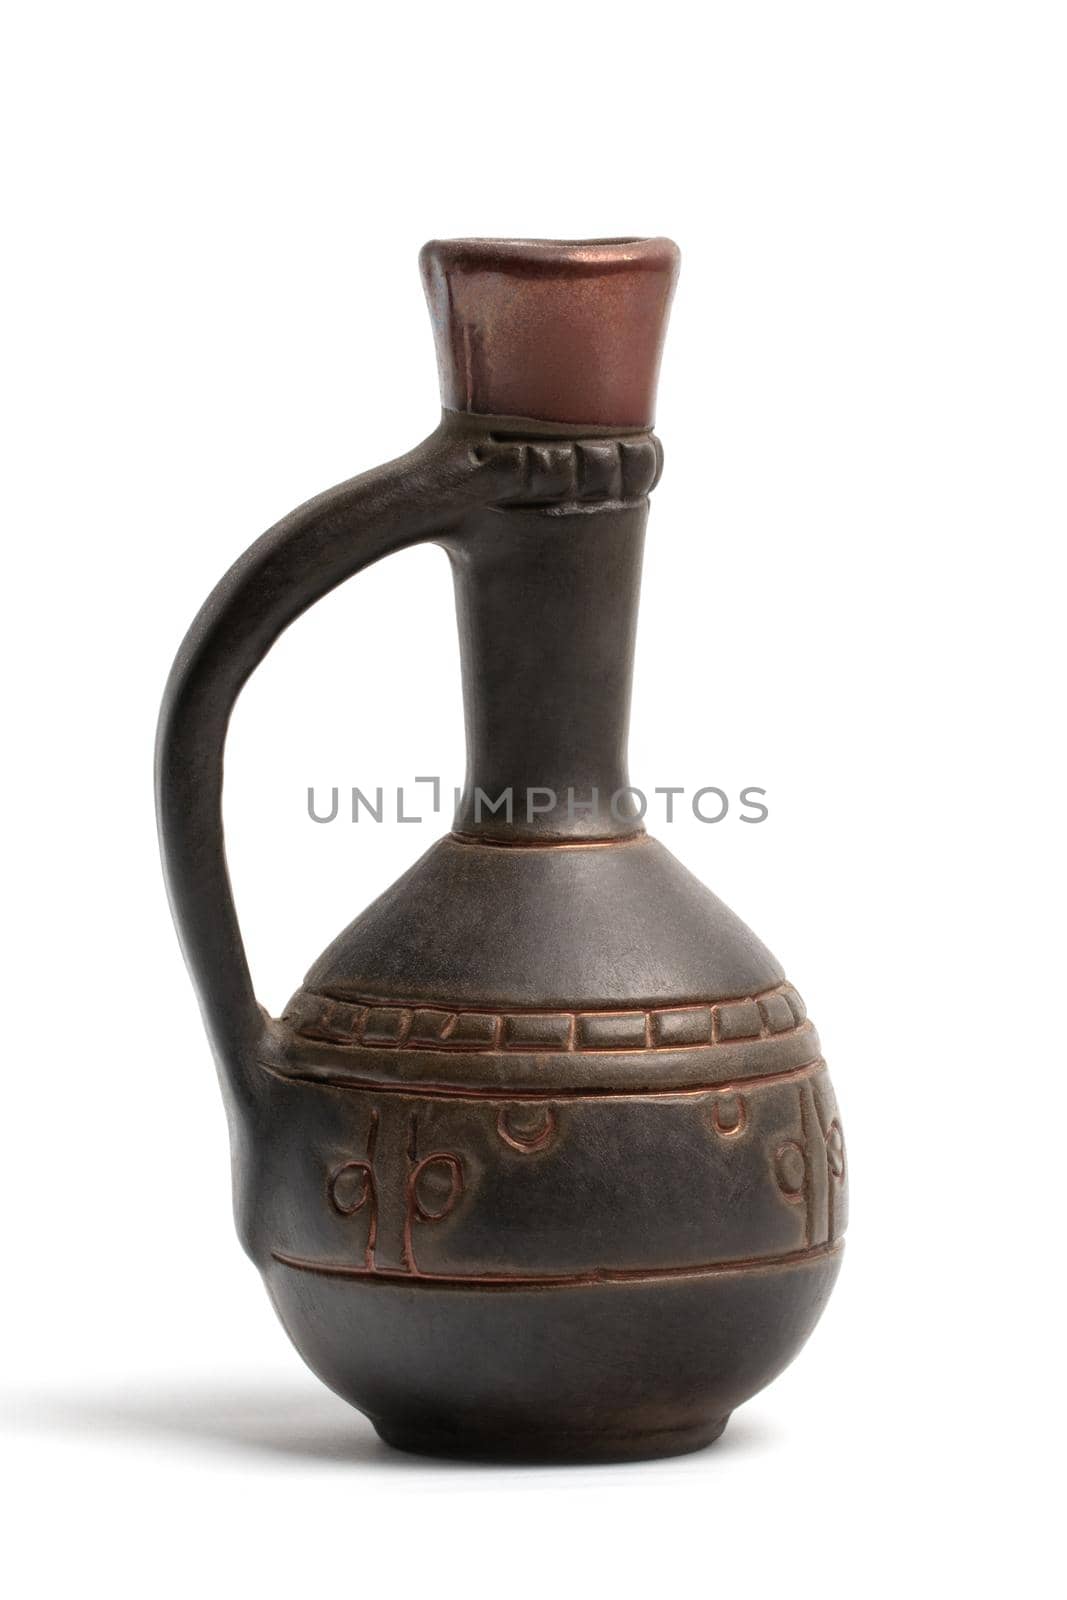 A small brown clay jug by clusterx